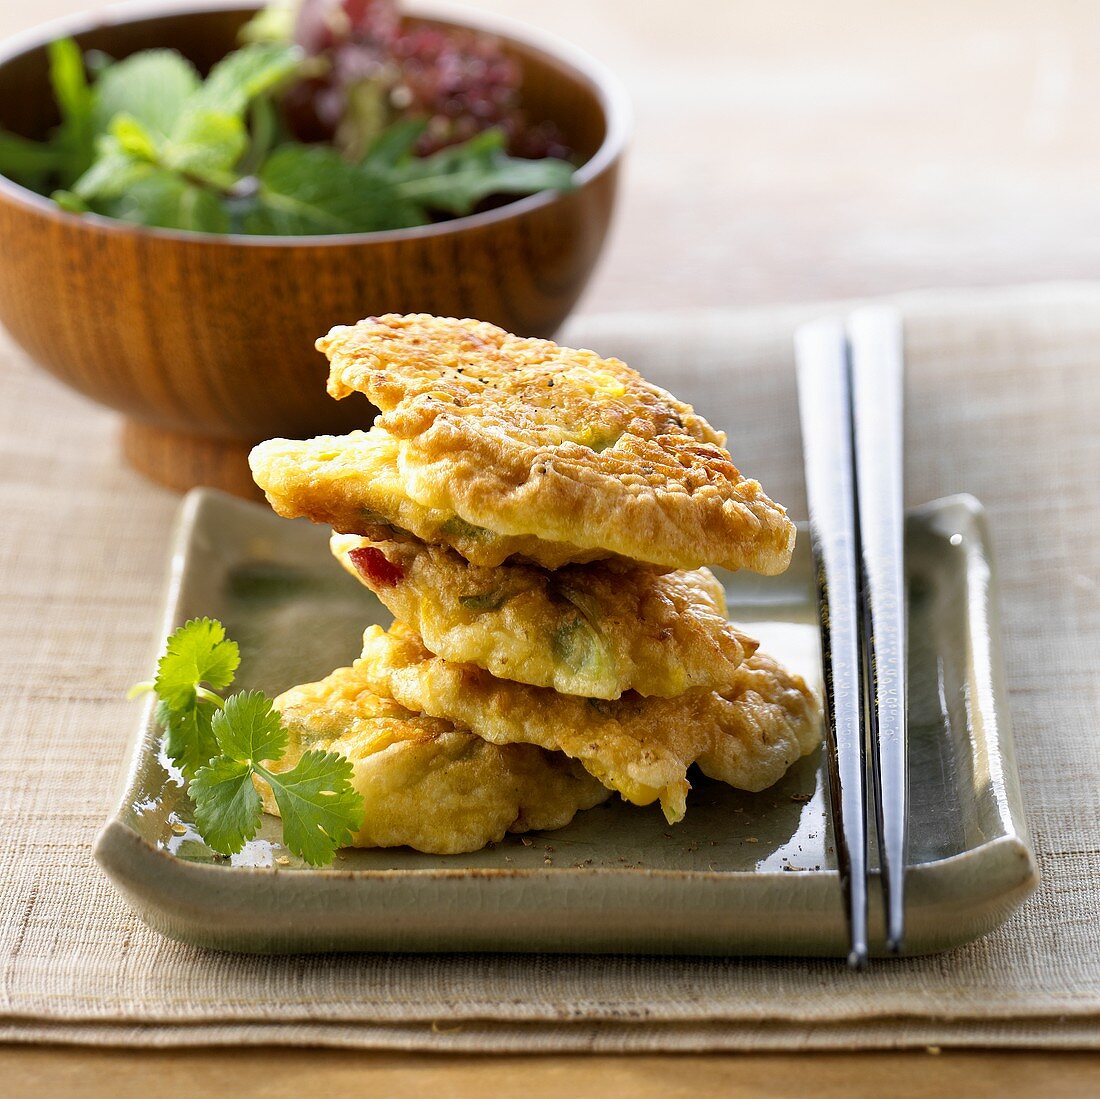 Sweetcorn cakes in a pile with salad accompaniment